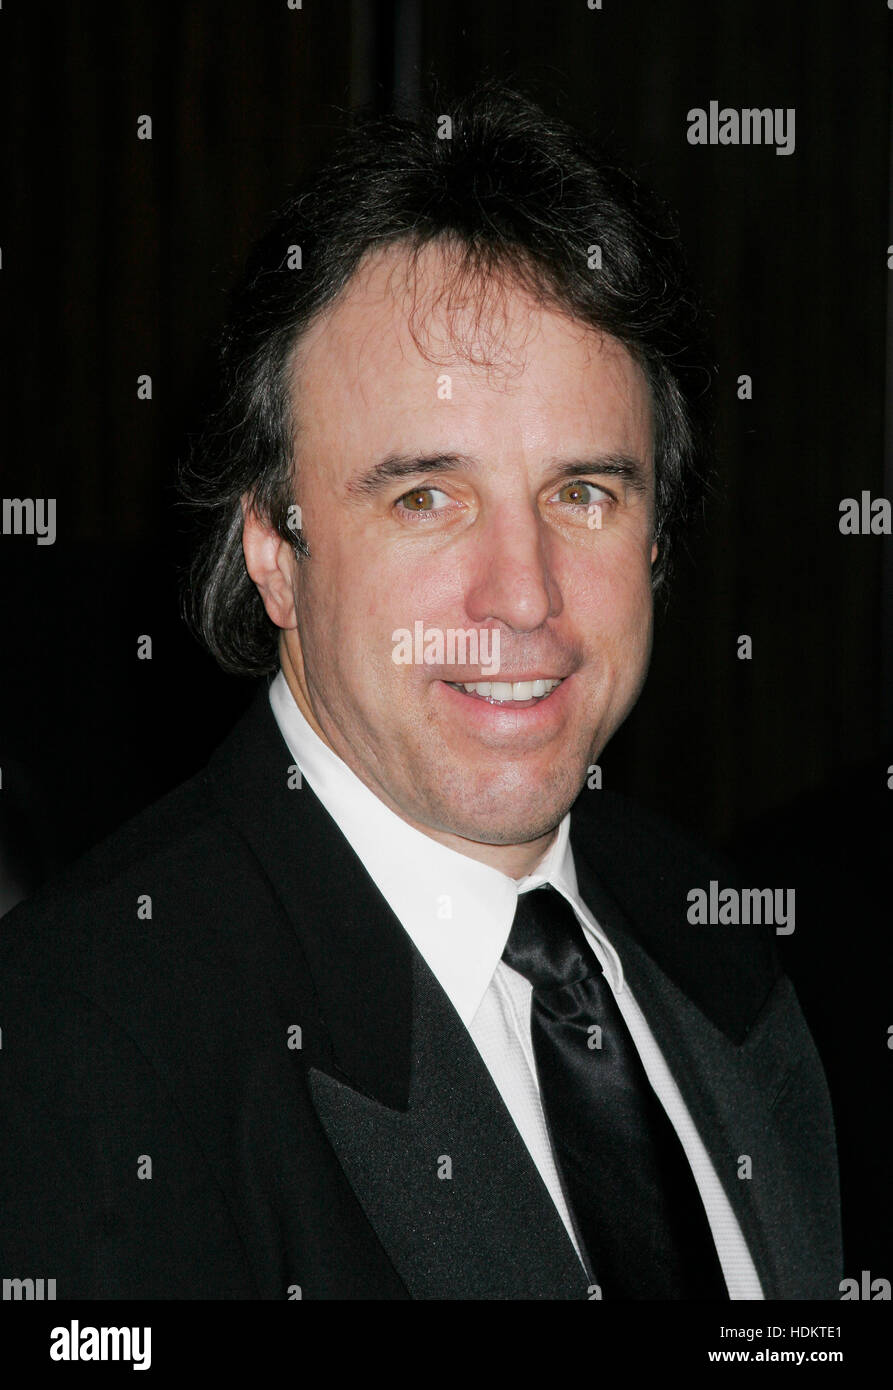 Kevin Nealon arrives at the 19th Annual American Cinematheque Award honoring actor Steve Martin in Beverly Hills, CA on November 12, 2004. Photo credit: Francis Specker Stock Photo